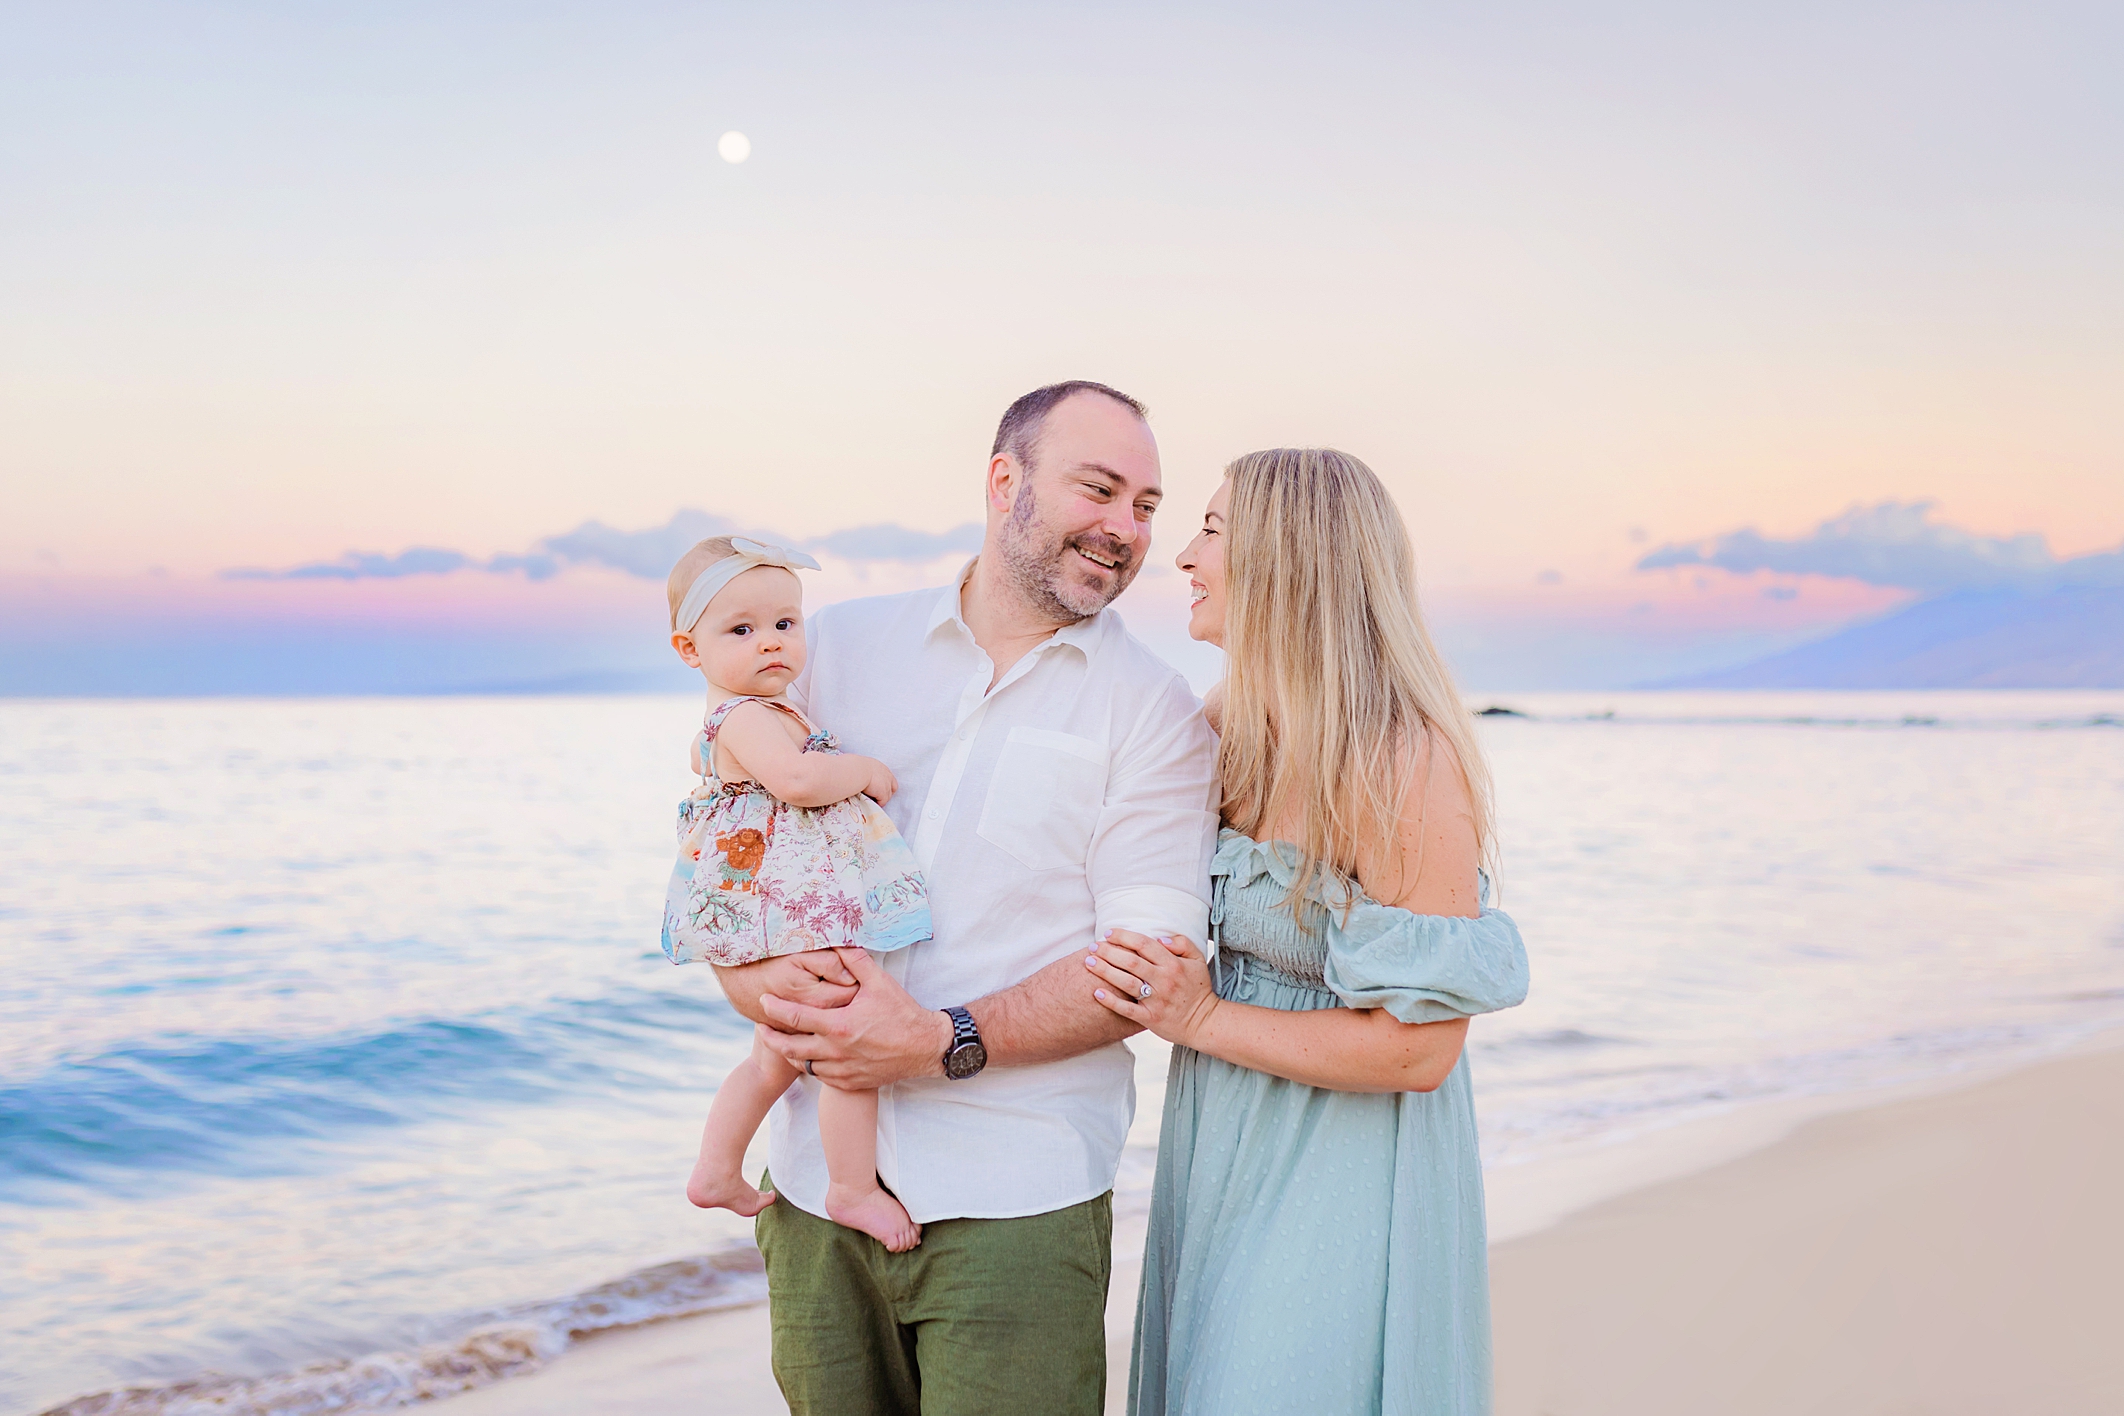 Mom and dad look at one another while holding daughter. toddler stares at the camera while the family is having pictures taken on the beach